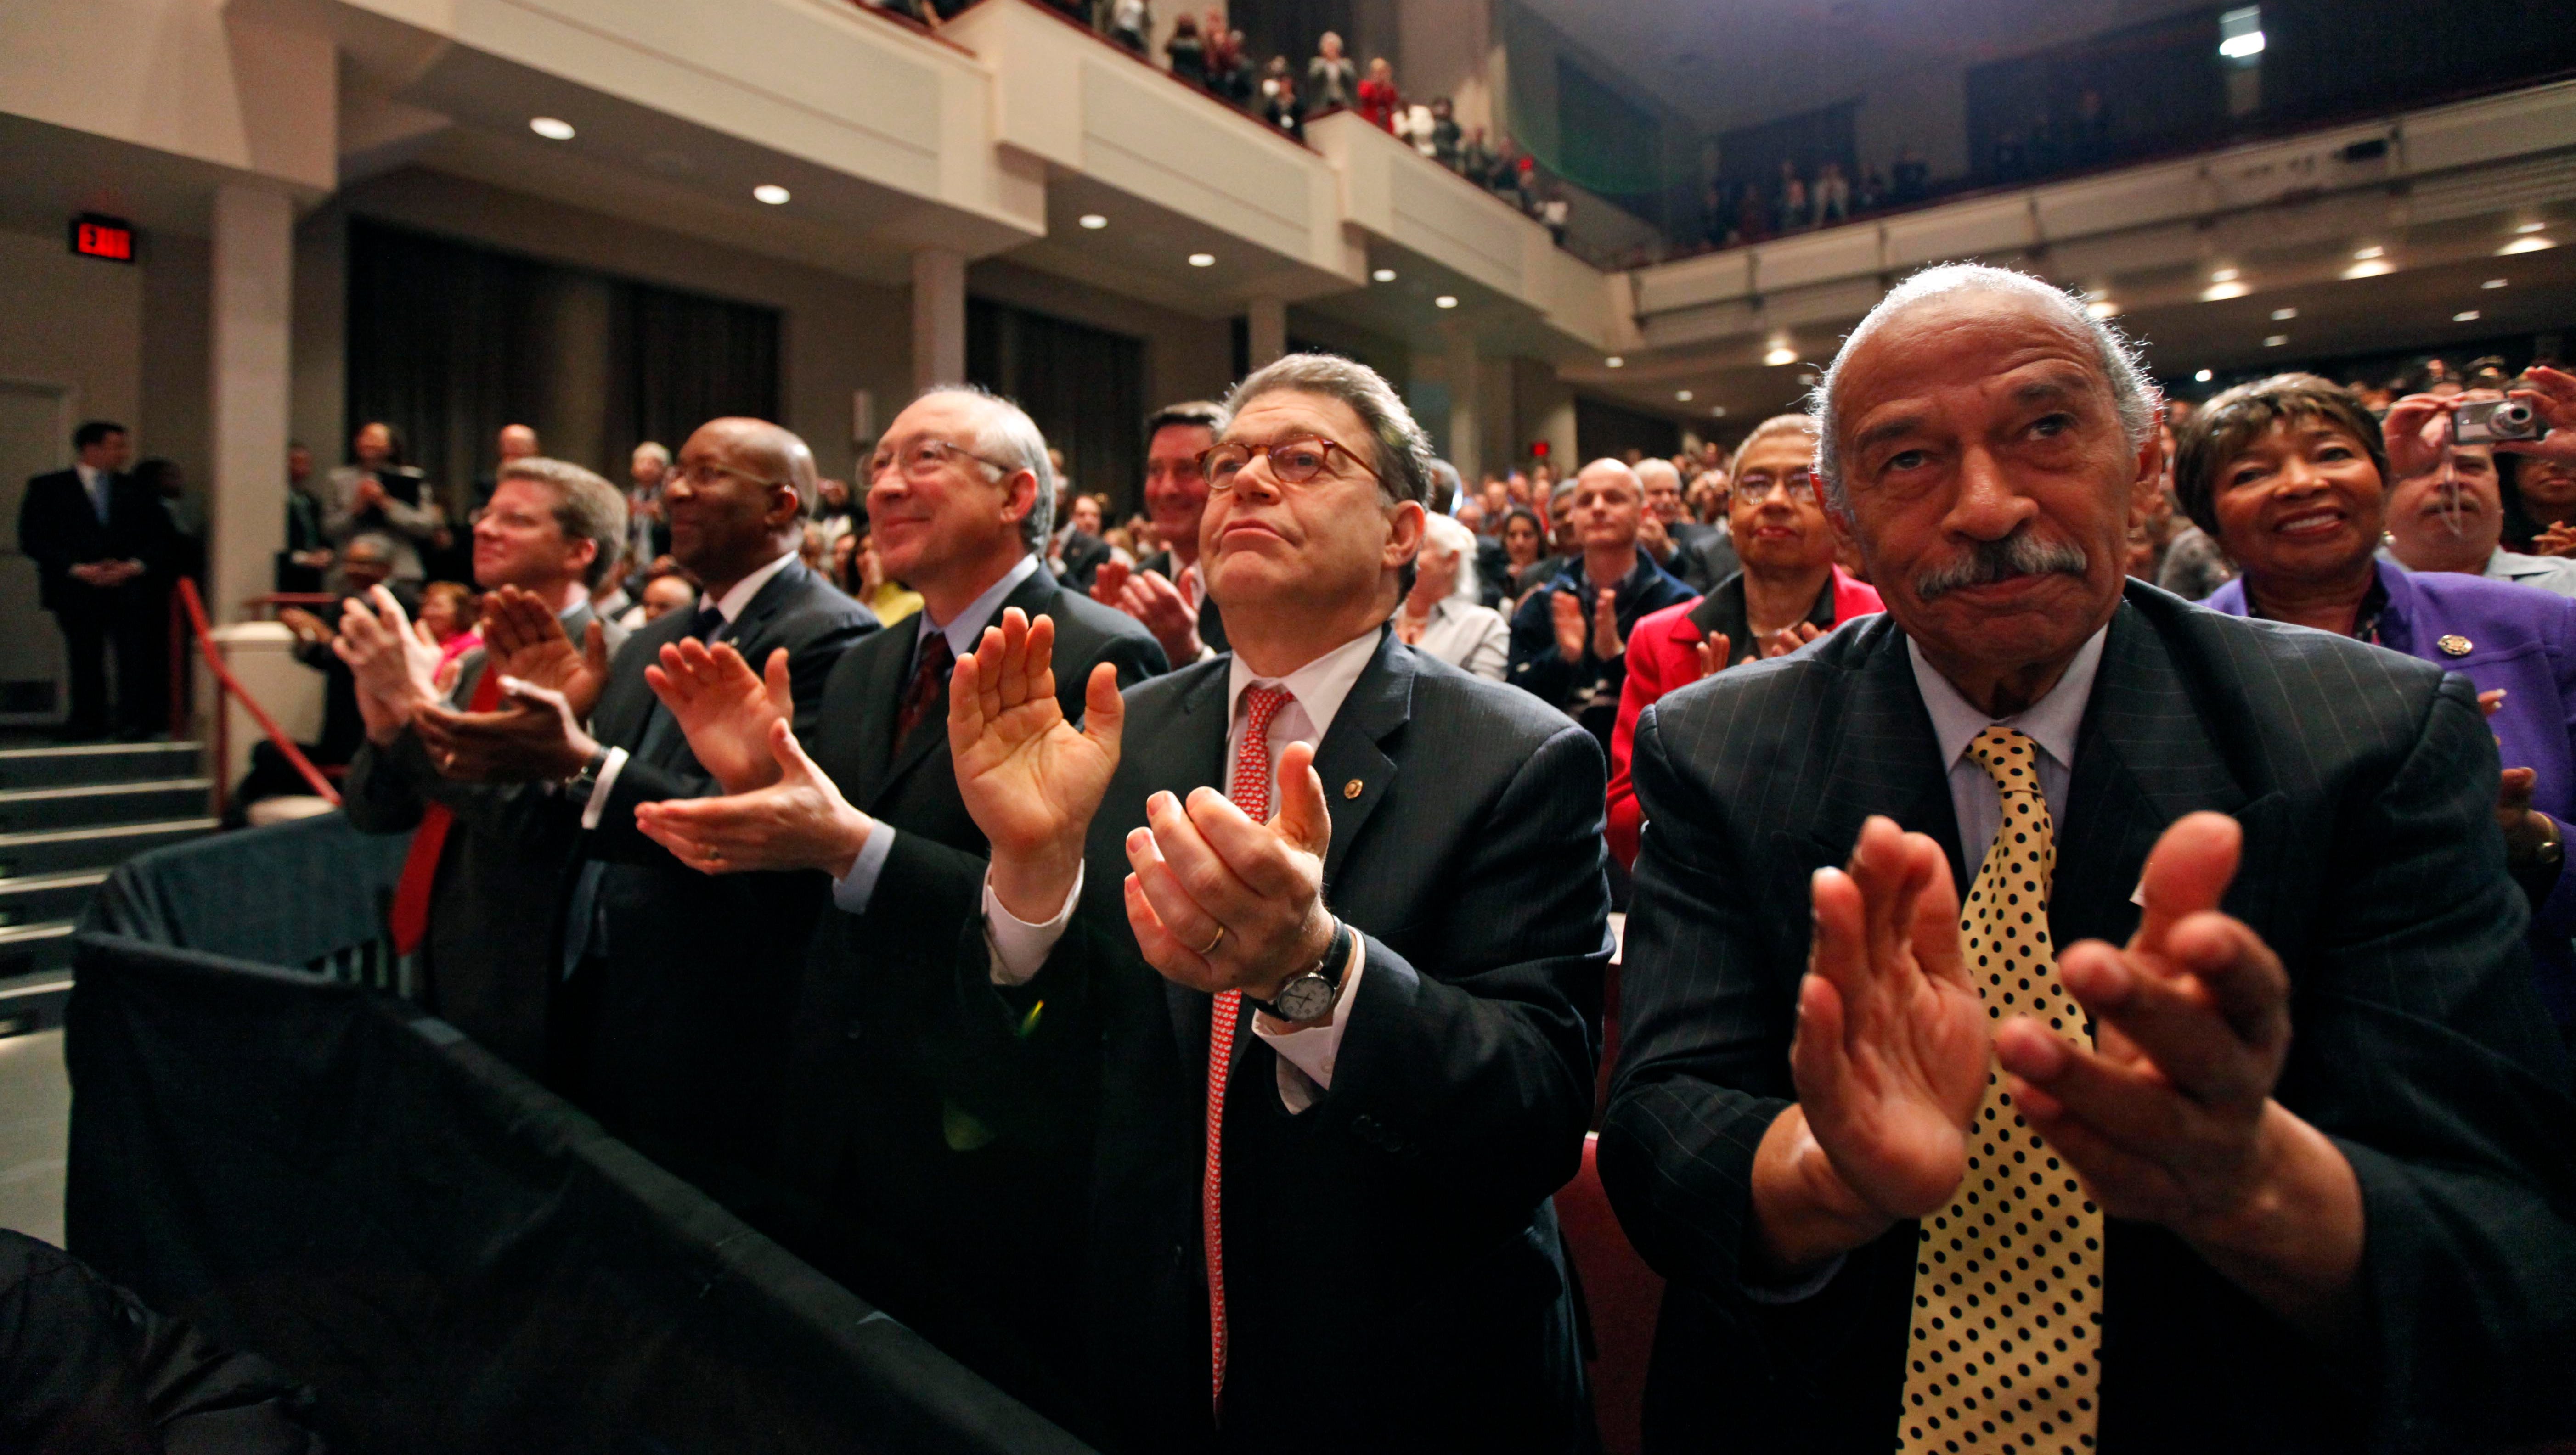 From right, Conyers, Sen. Al Franken, D-Minn., and Secretary of the Interior Ken Salazar applaud as President Barack Obama speaks before signing the landmark health care act in Alexandria, Virginia, March 30, 2010.